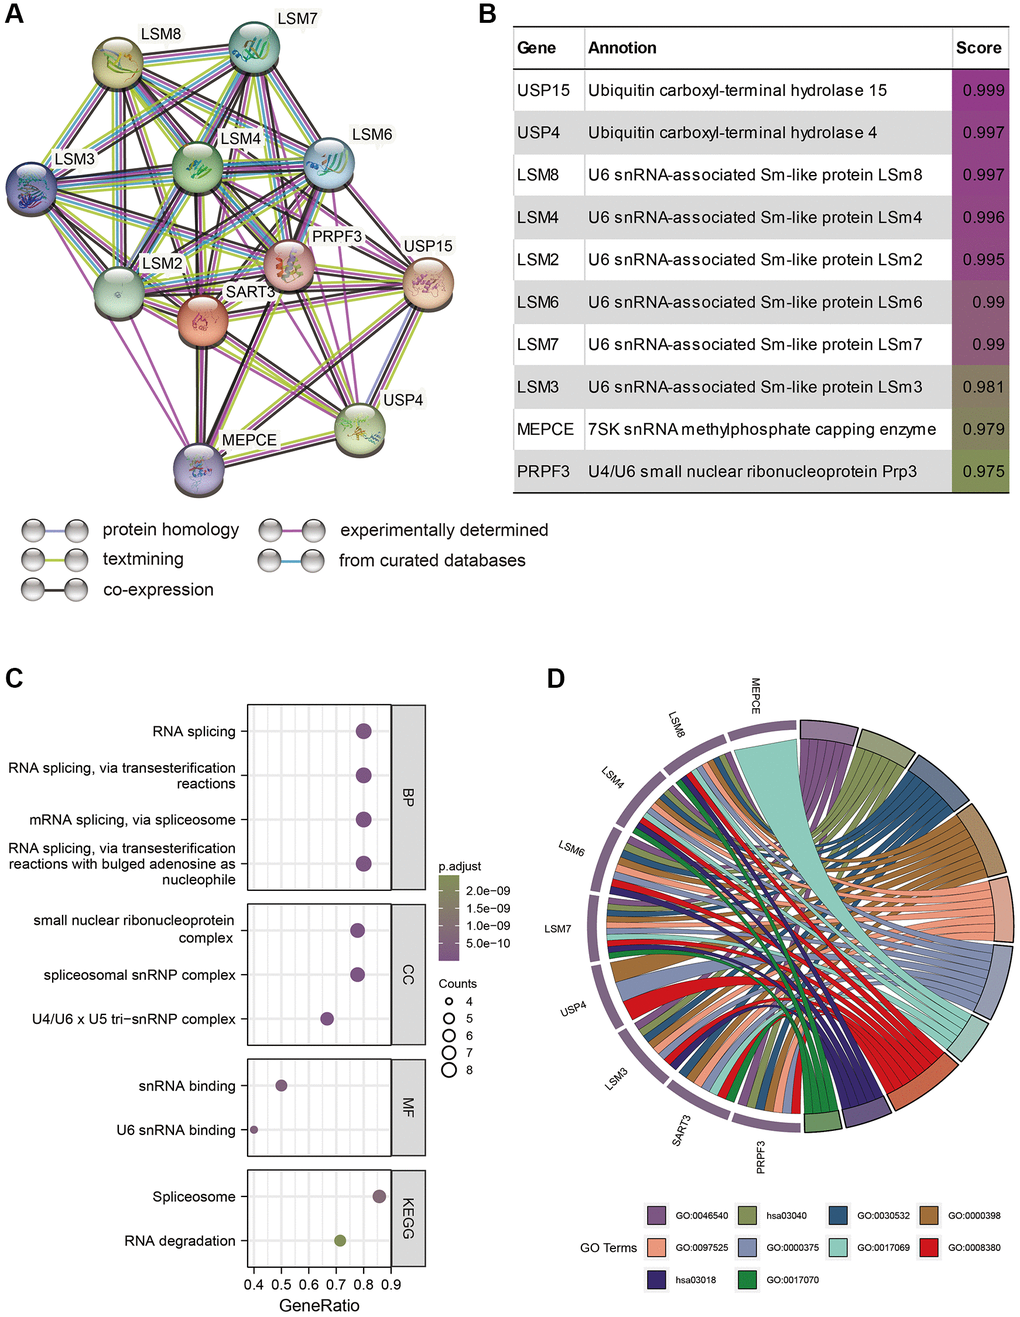 SART3 and its related genes are closely associated with RNA transcription in HCC cells. (A) PPI network of SART3-associated genes. (B) Annotations and correlation coefficients of nine SART3-related genes. (C, D) Enriched GO and KEGG pathways of SART3 and its related genes.